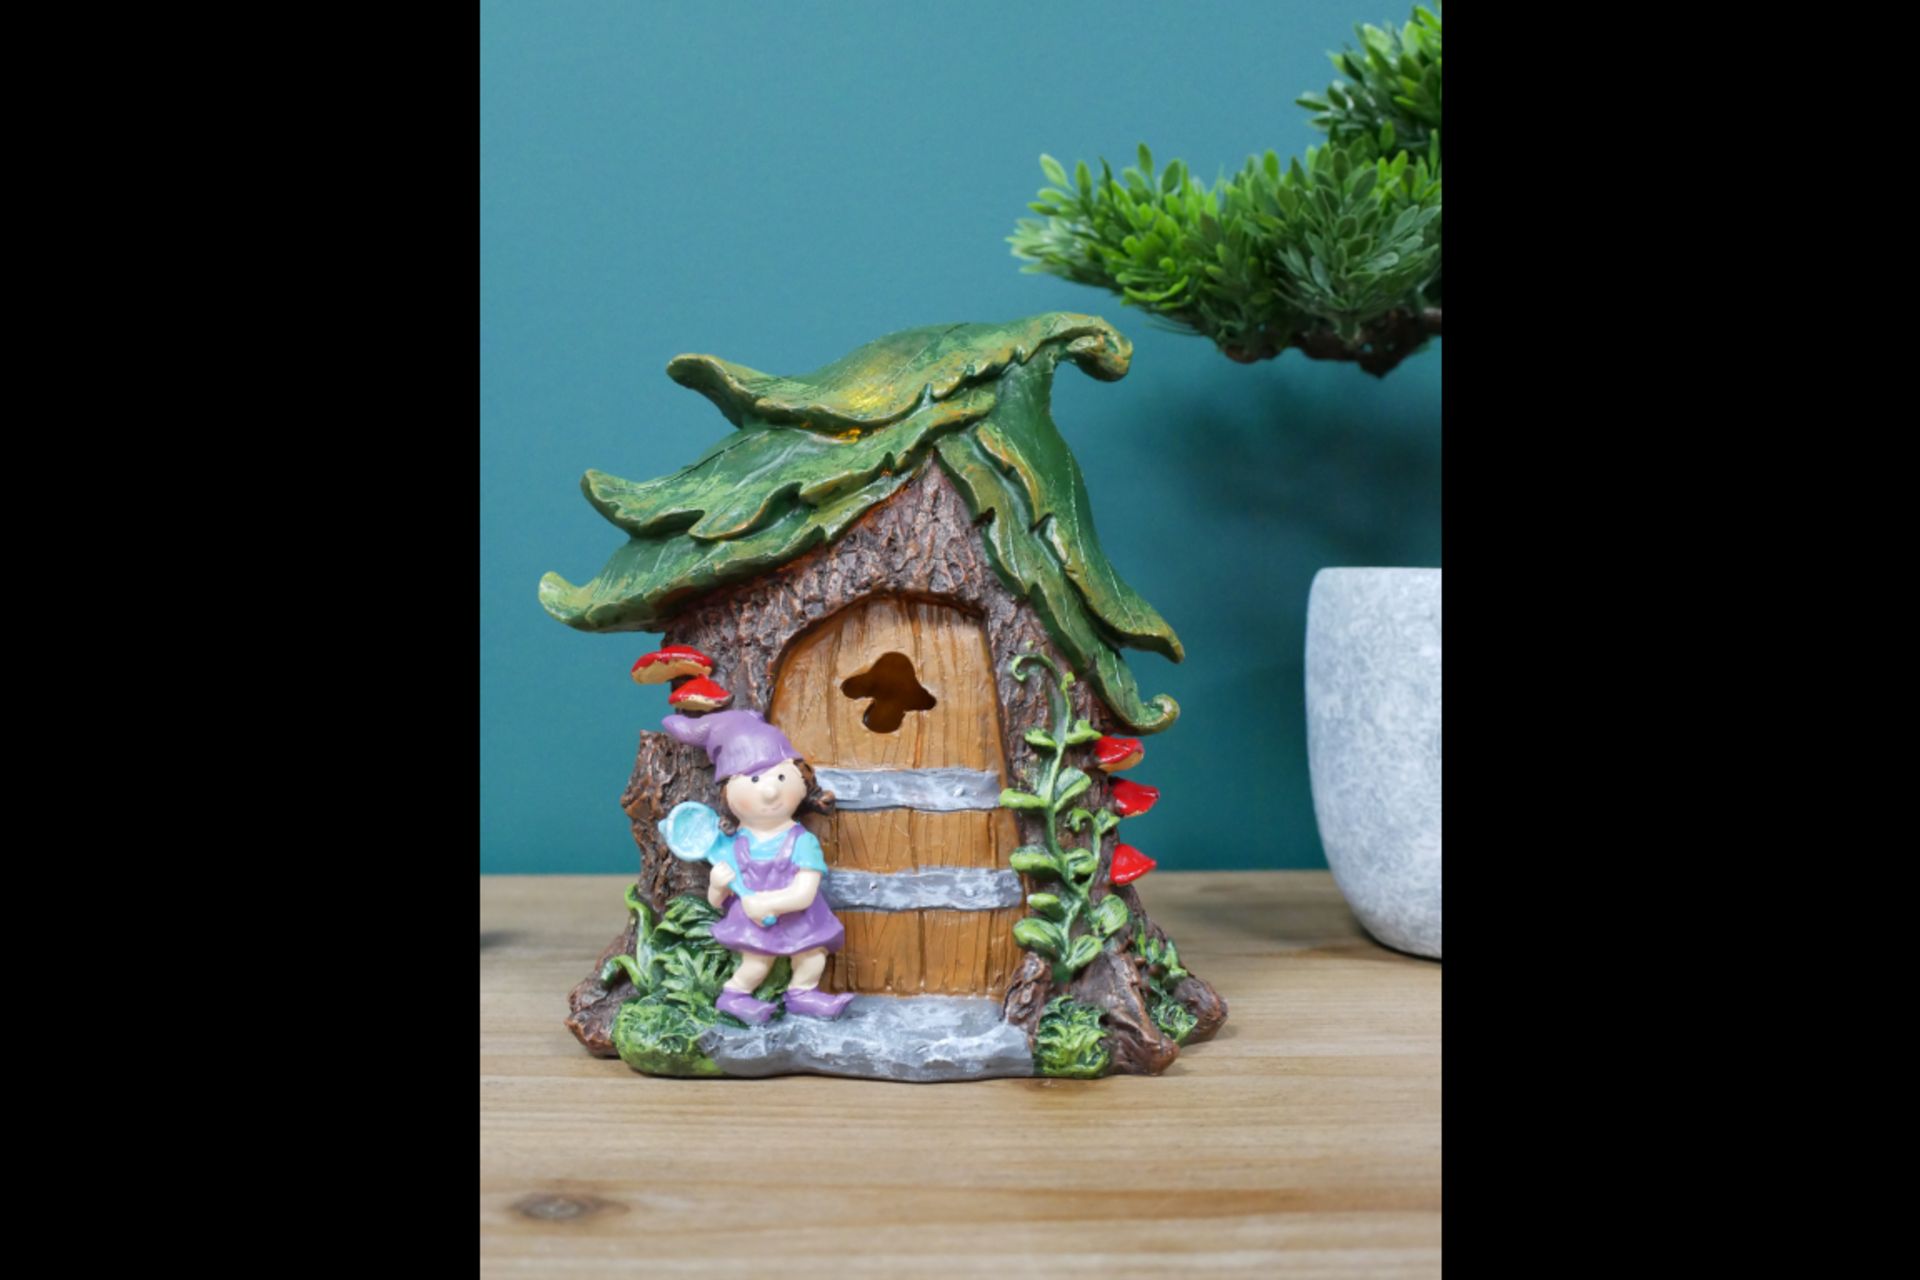 Fairy Solar Home - Image 4 of 4